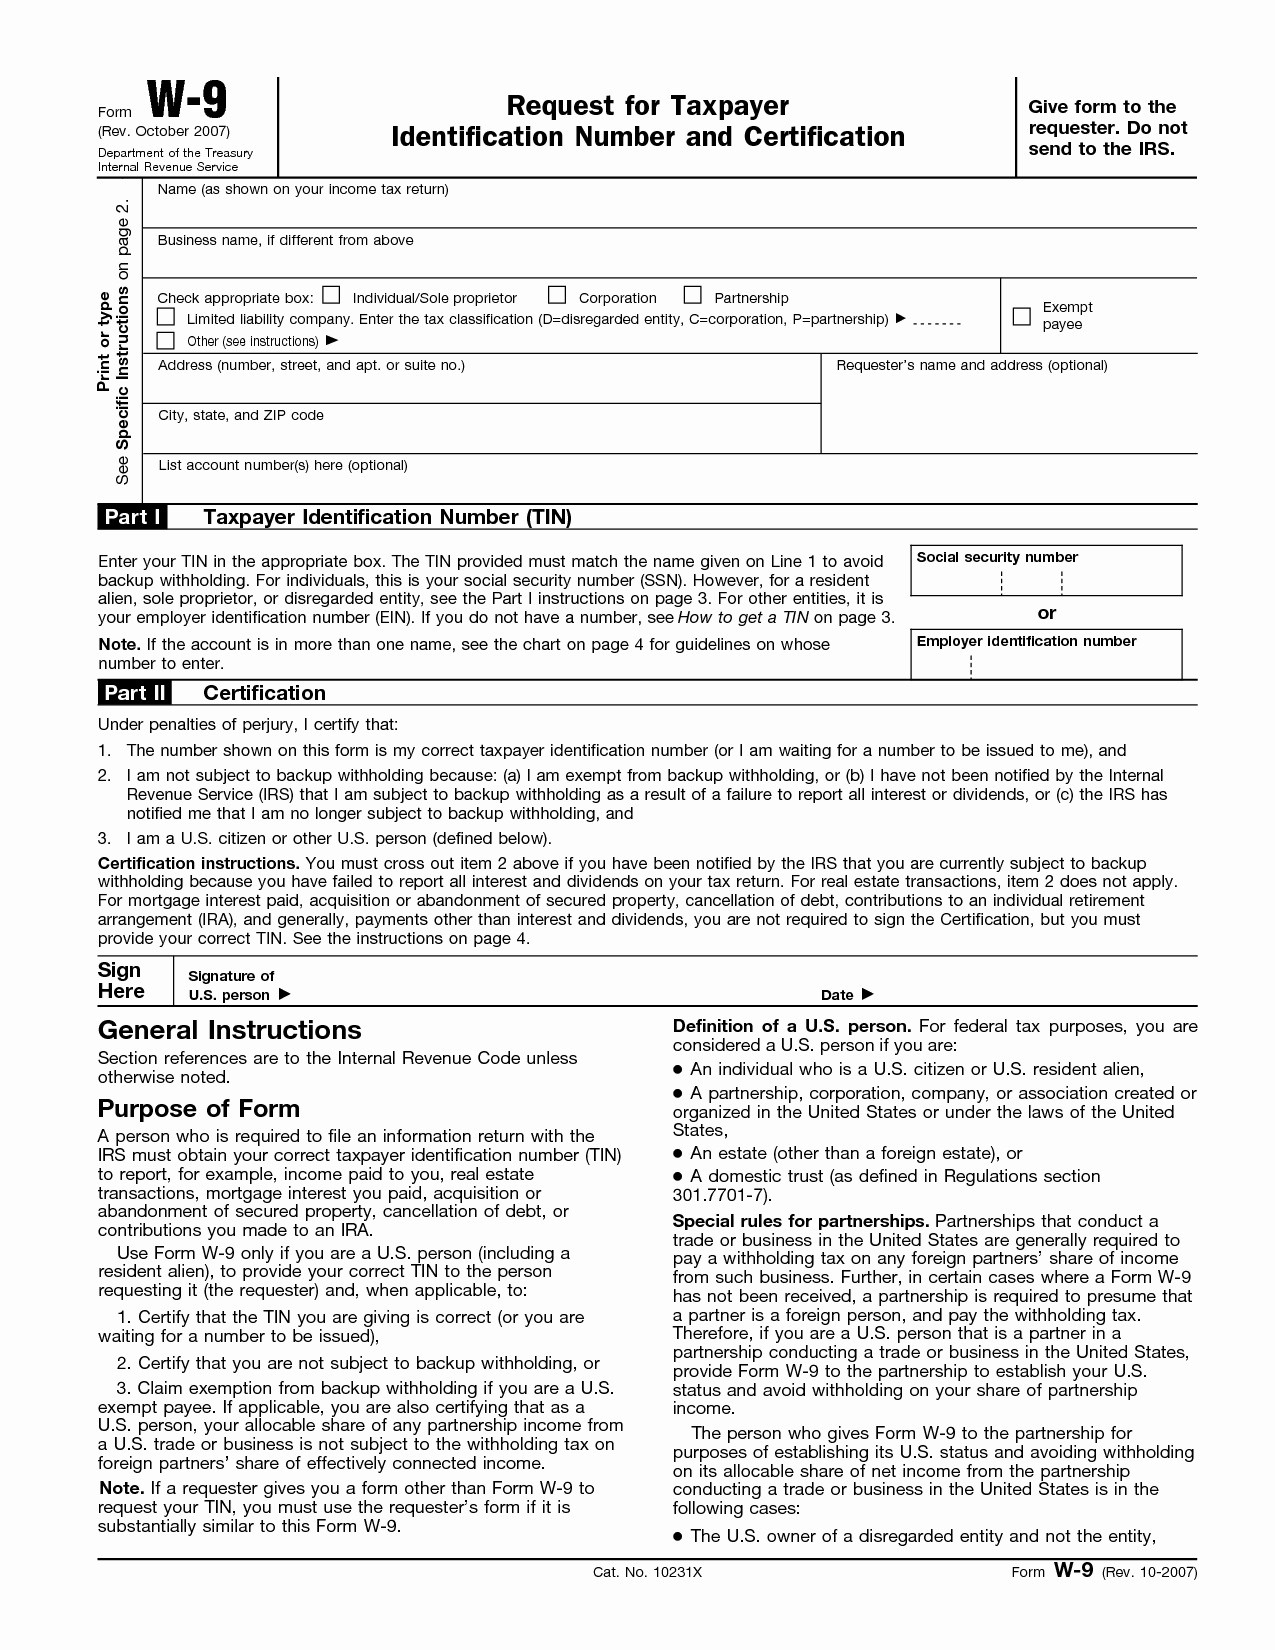 Irs W9 Form Free Download Create Edit Fill And Print #2599854084 - W9 Free Printable Form 2016